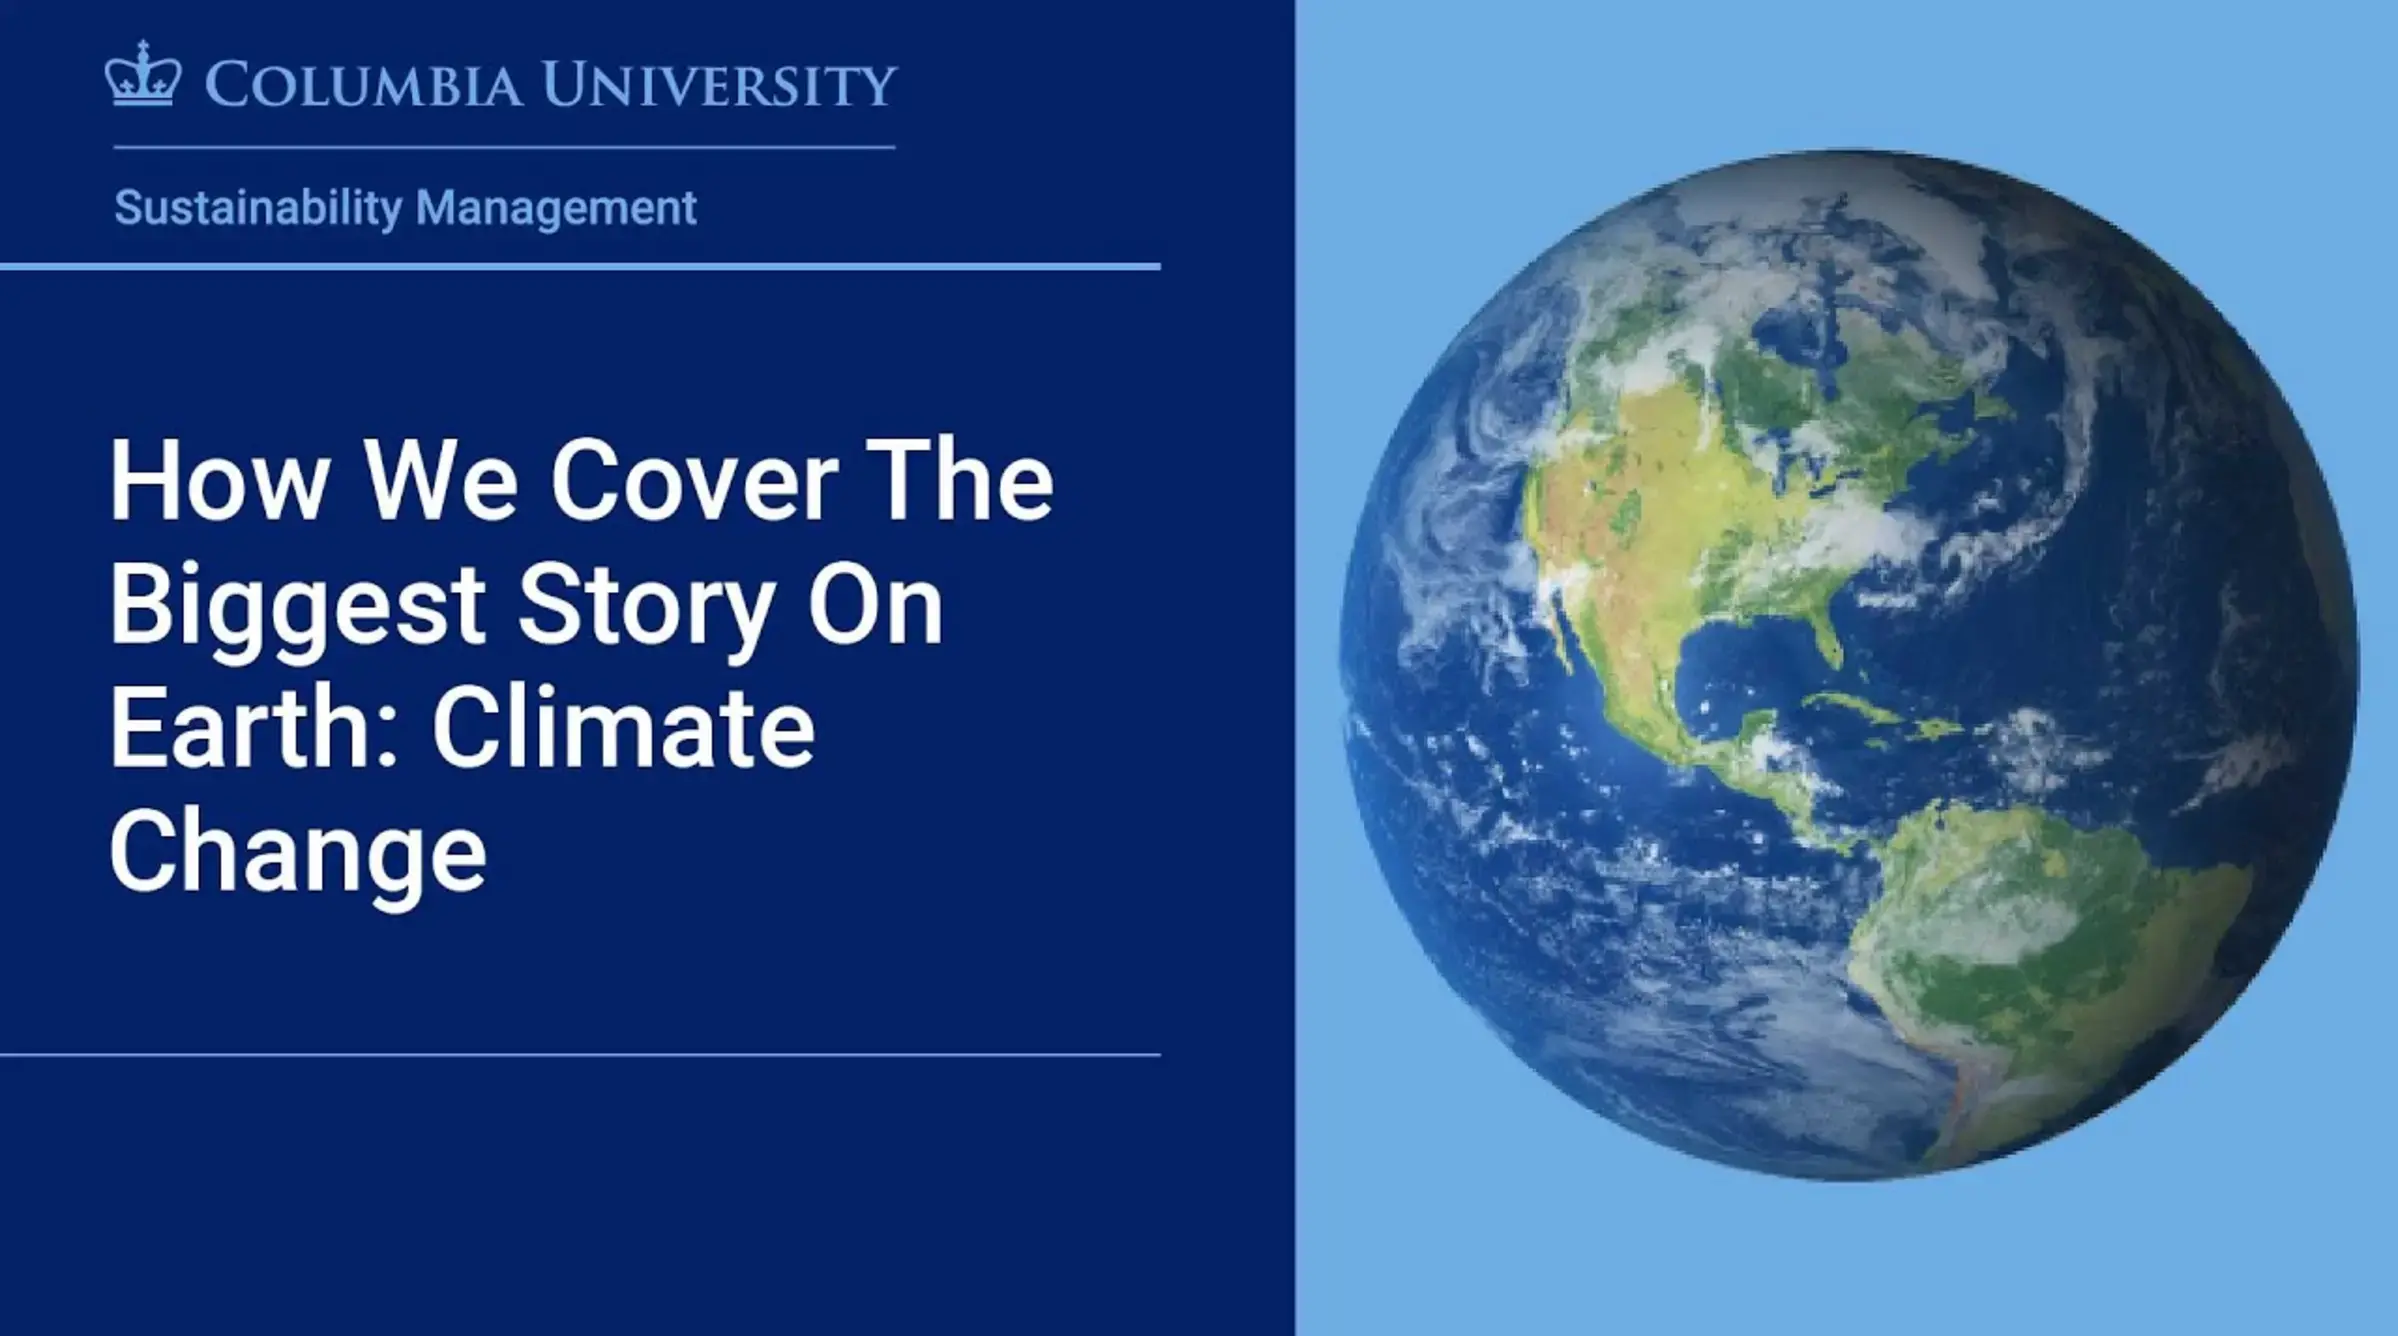 How We Cover the Biggest Story on Earth: Climate Change